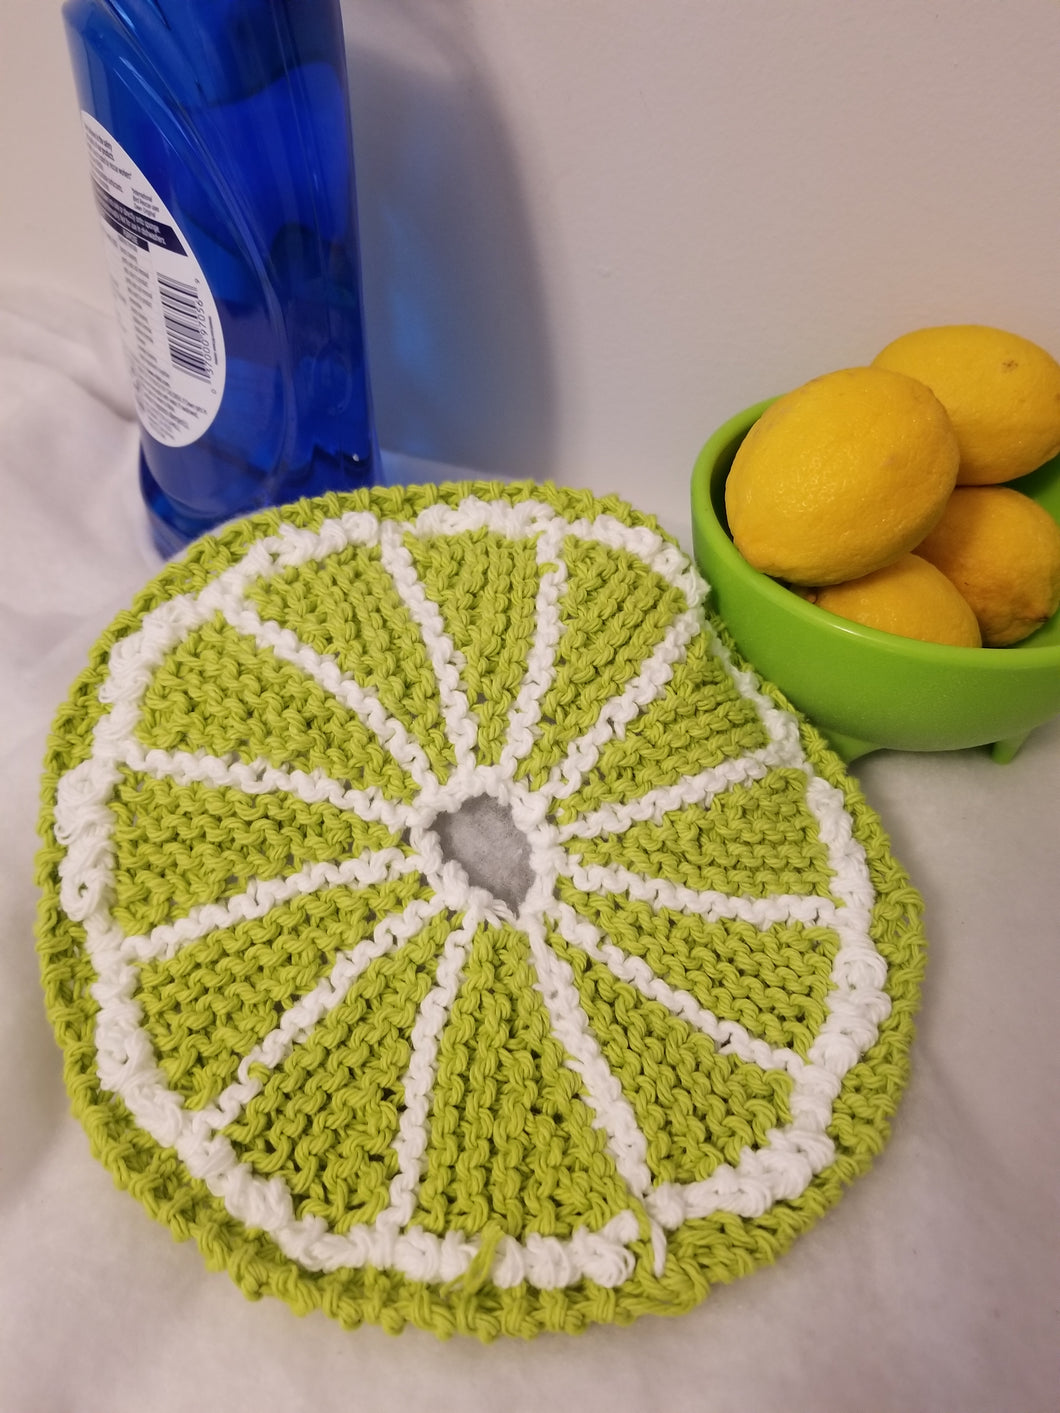 These fun Fruit Slice Kitchen Cloths add vibrancy to your kitchen and home. Crafted from 100% cotton, these reusable cloths are perfect for use as a dish towel, pot holder, or trivet. Protect your countertop with these colorful and eco-friendly Lime Slices!